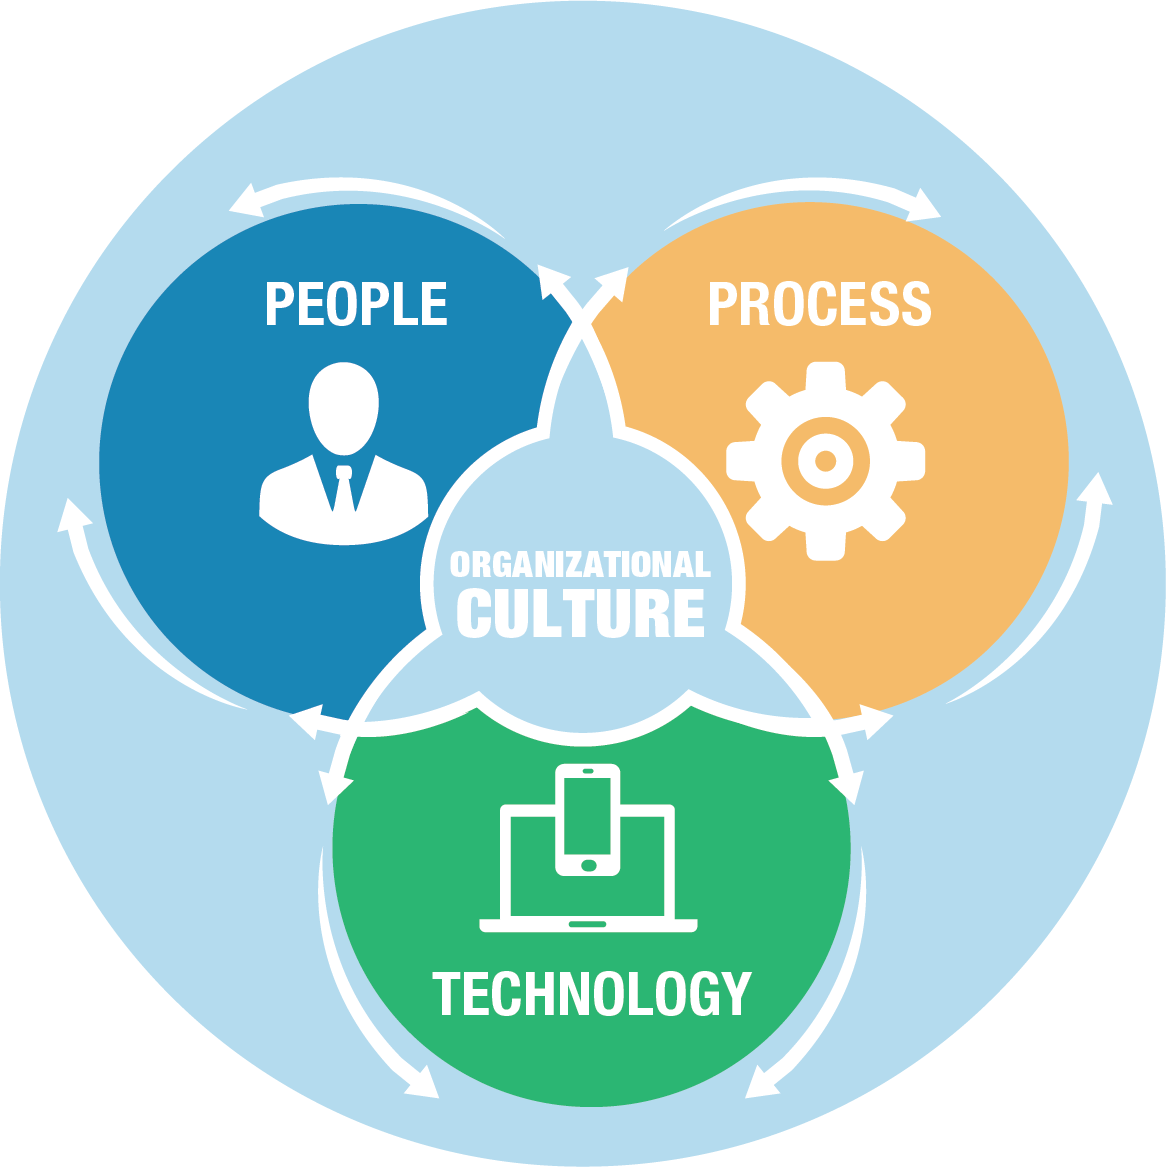 People-Process-Technology-Culture